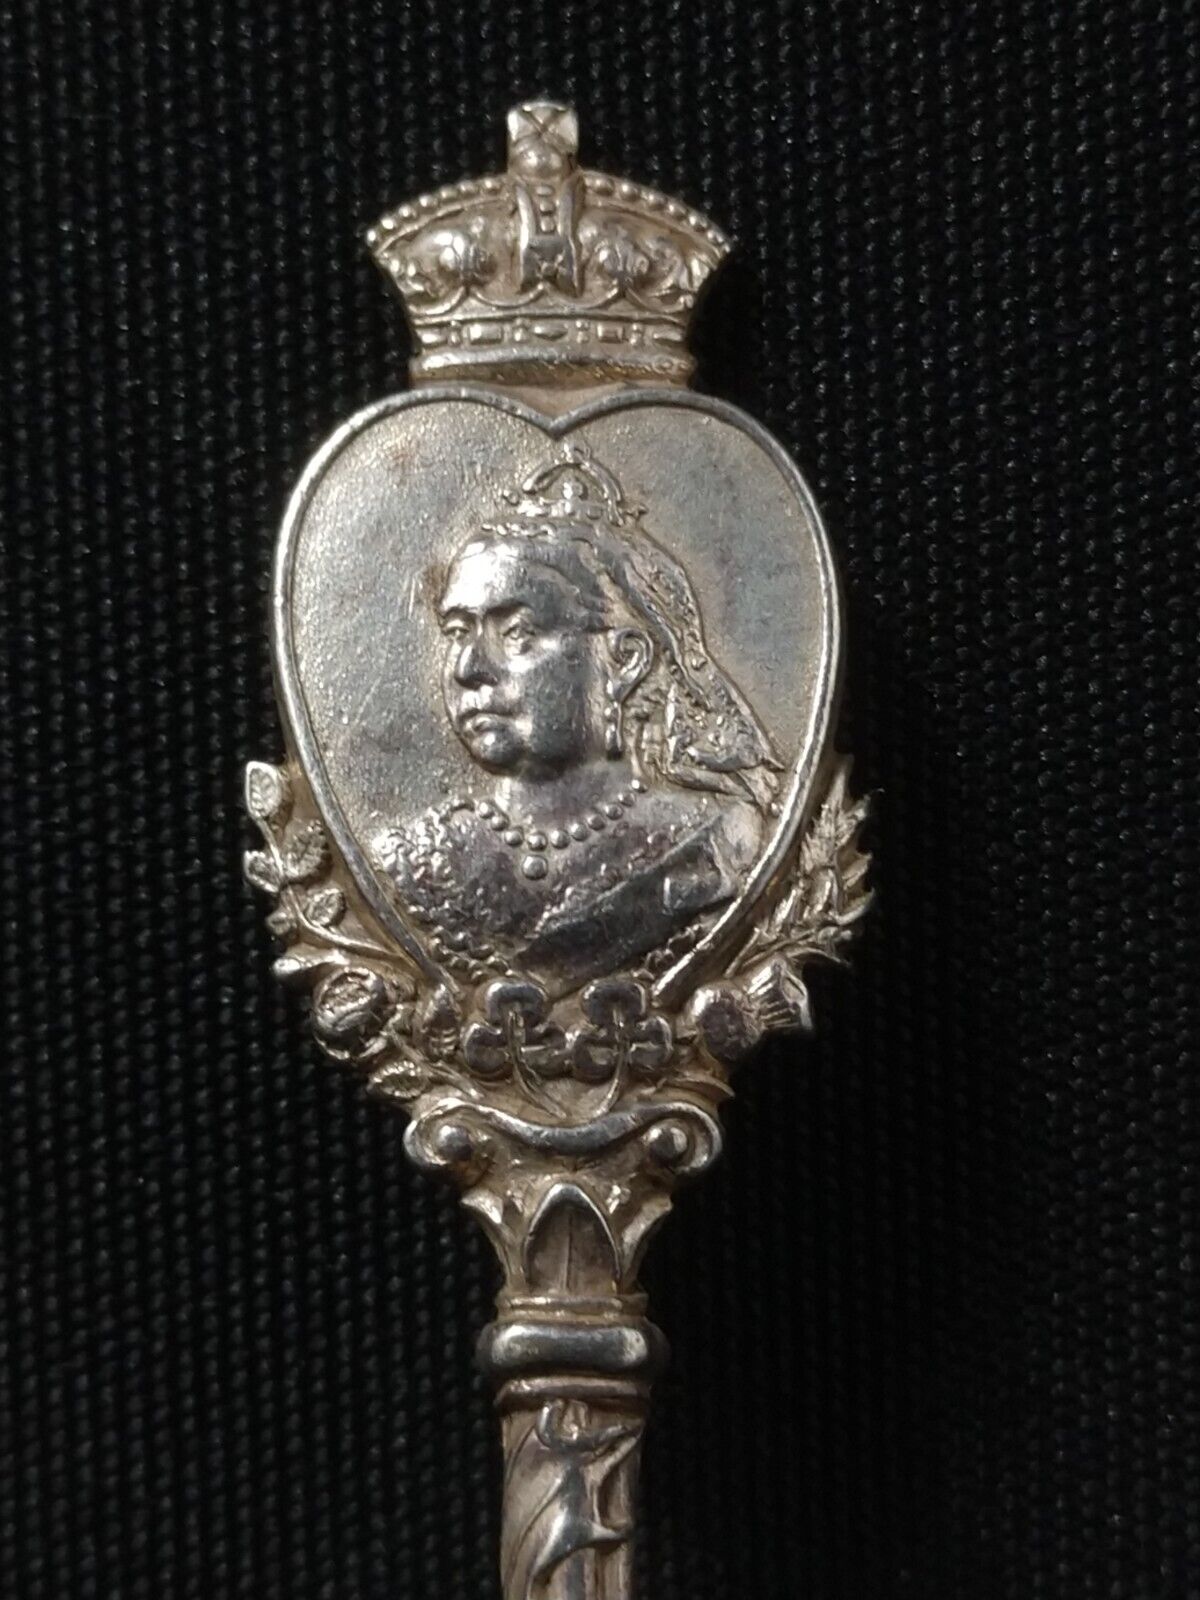 An 1896 Sterling Silver Spoon for QUEEN VICTORIA Diamond Jubilee Joseph Rodgers